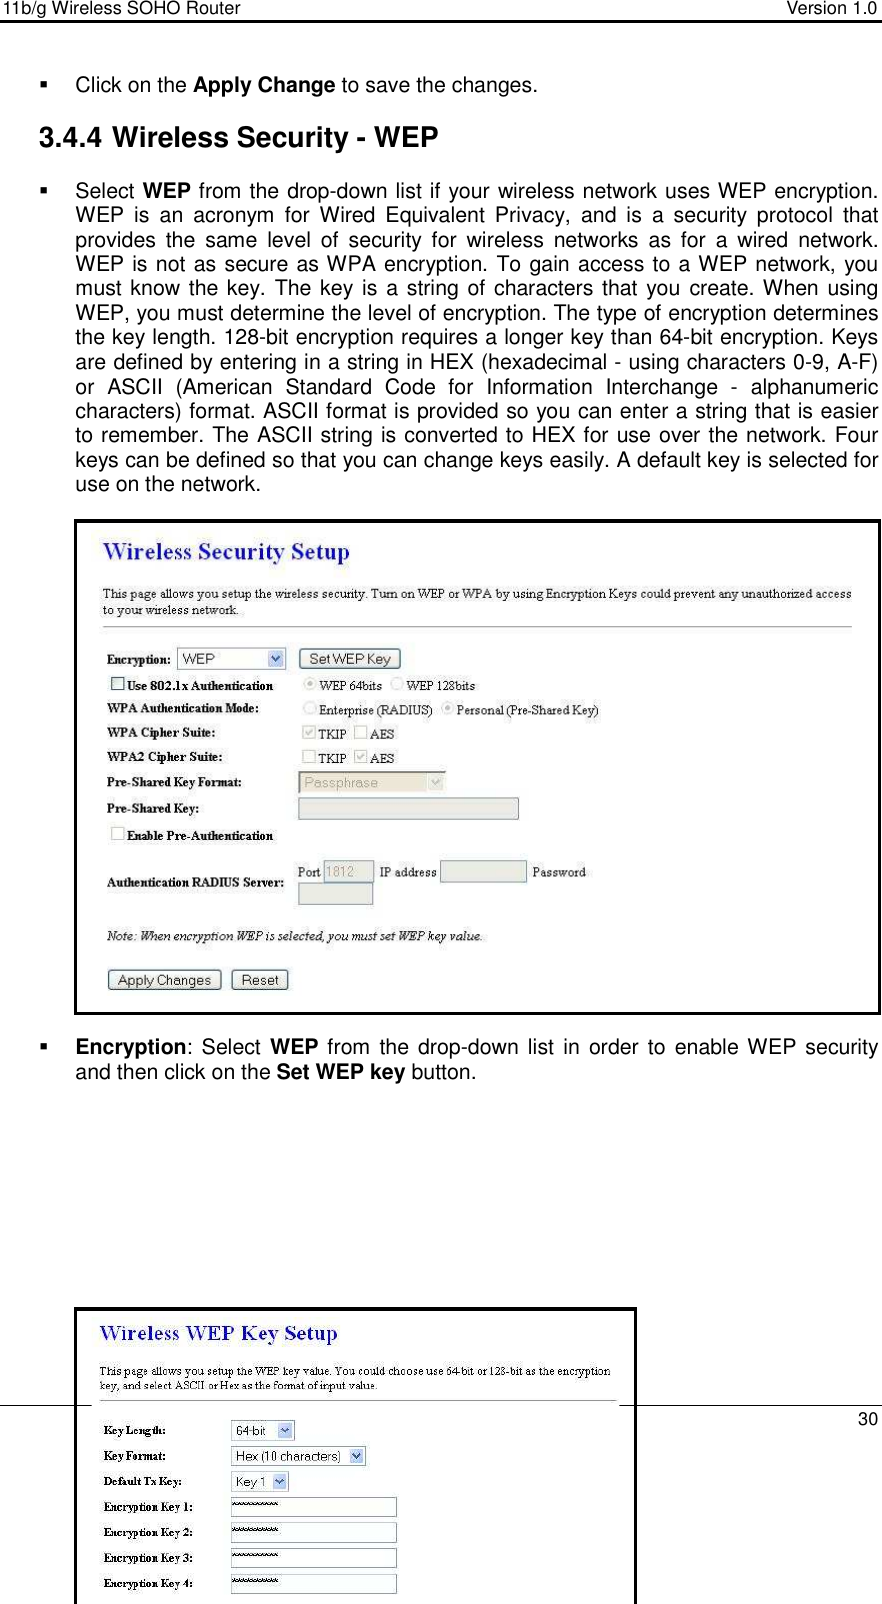 11b/g Wireless SOHO Router                                     Version 1.0    30    Click on the Apply Change to save the changes.   3.4.4 Wireless Security - WEP   Select WEP from the drop-down list if your wireless network uses WEP encryption. WEP  is  an  acronym  for  Wired  Equivalent  Privacy,  and  is  a  security  protocol  that provides  the  same  level  of  security  for  wireless  networks  as  for  a  wired  network.  WEP is not as secure as WPA encryption. To gain access to a WEP network, you must know the key. The key is  a string of characters that you create. When using WEP, you must determine the level of encryption. The type of encryption determines the key length. 128-bit encryption requires a longer key than 64-bit encryption. Keys are defined by entering in a string in HEX (hexadecimal - using characters 0-9, A-F) or  ASCII  (American  Standard  Code  for  Information  Interchange  -  alphanumeric characters) format. ASCII format is provided so you can enter a string that is easier to remember. The ASCII string is converted to HEX for use over the network. Four keys can be defined so that you can change keys easily. A default key is selected for use on the network.                        Encryption:  Select WEP  from the drop-down  list in order to enable WEP security and then click on the Set WEP key button.               